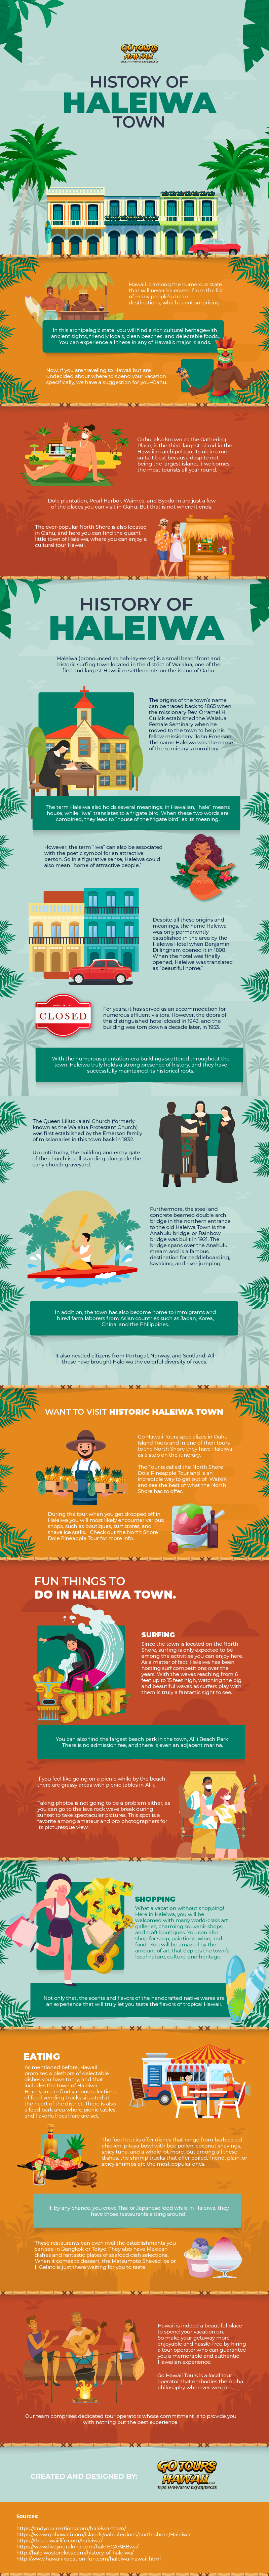 History of Haleiwa Town - Infographic Image